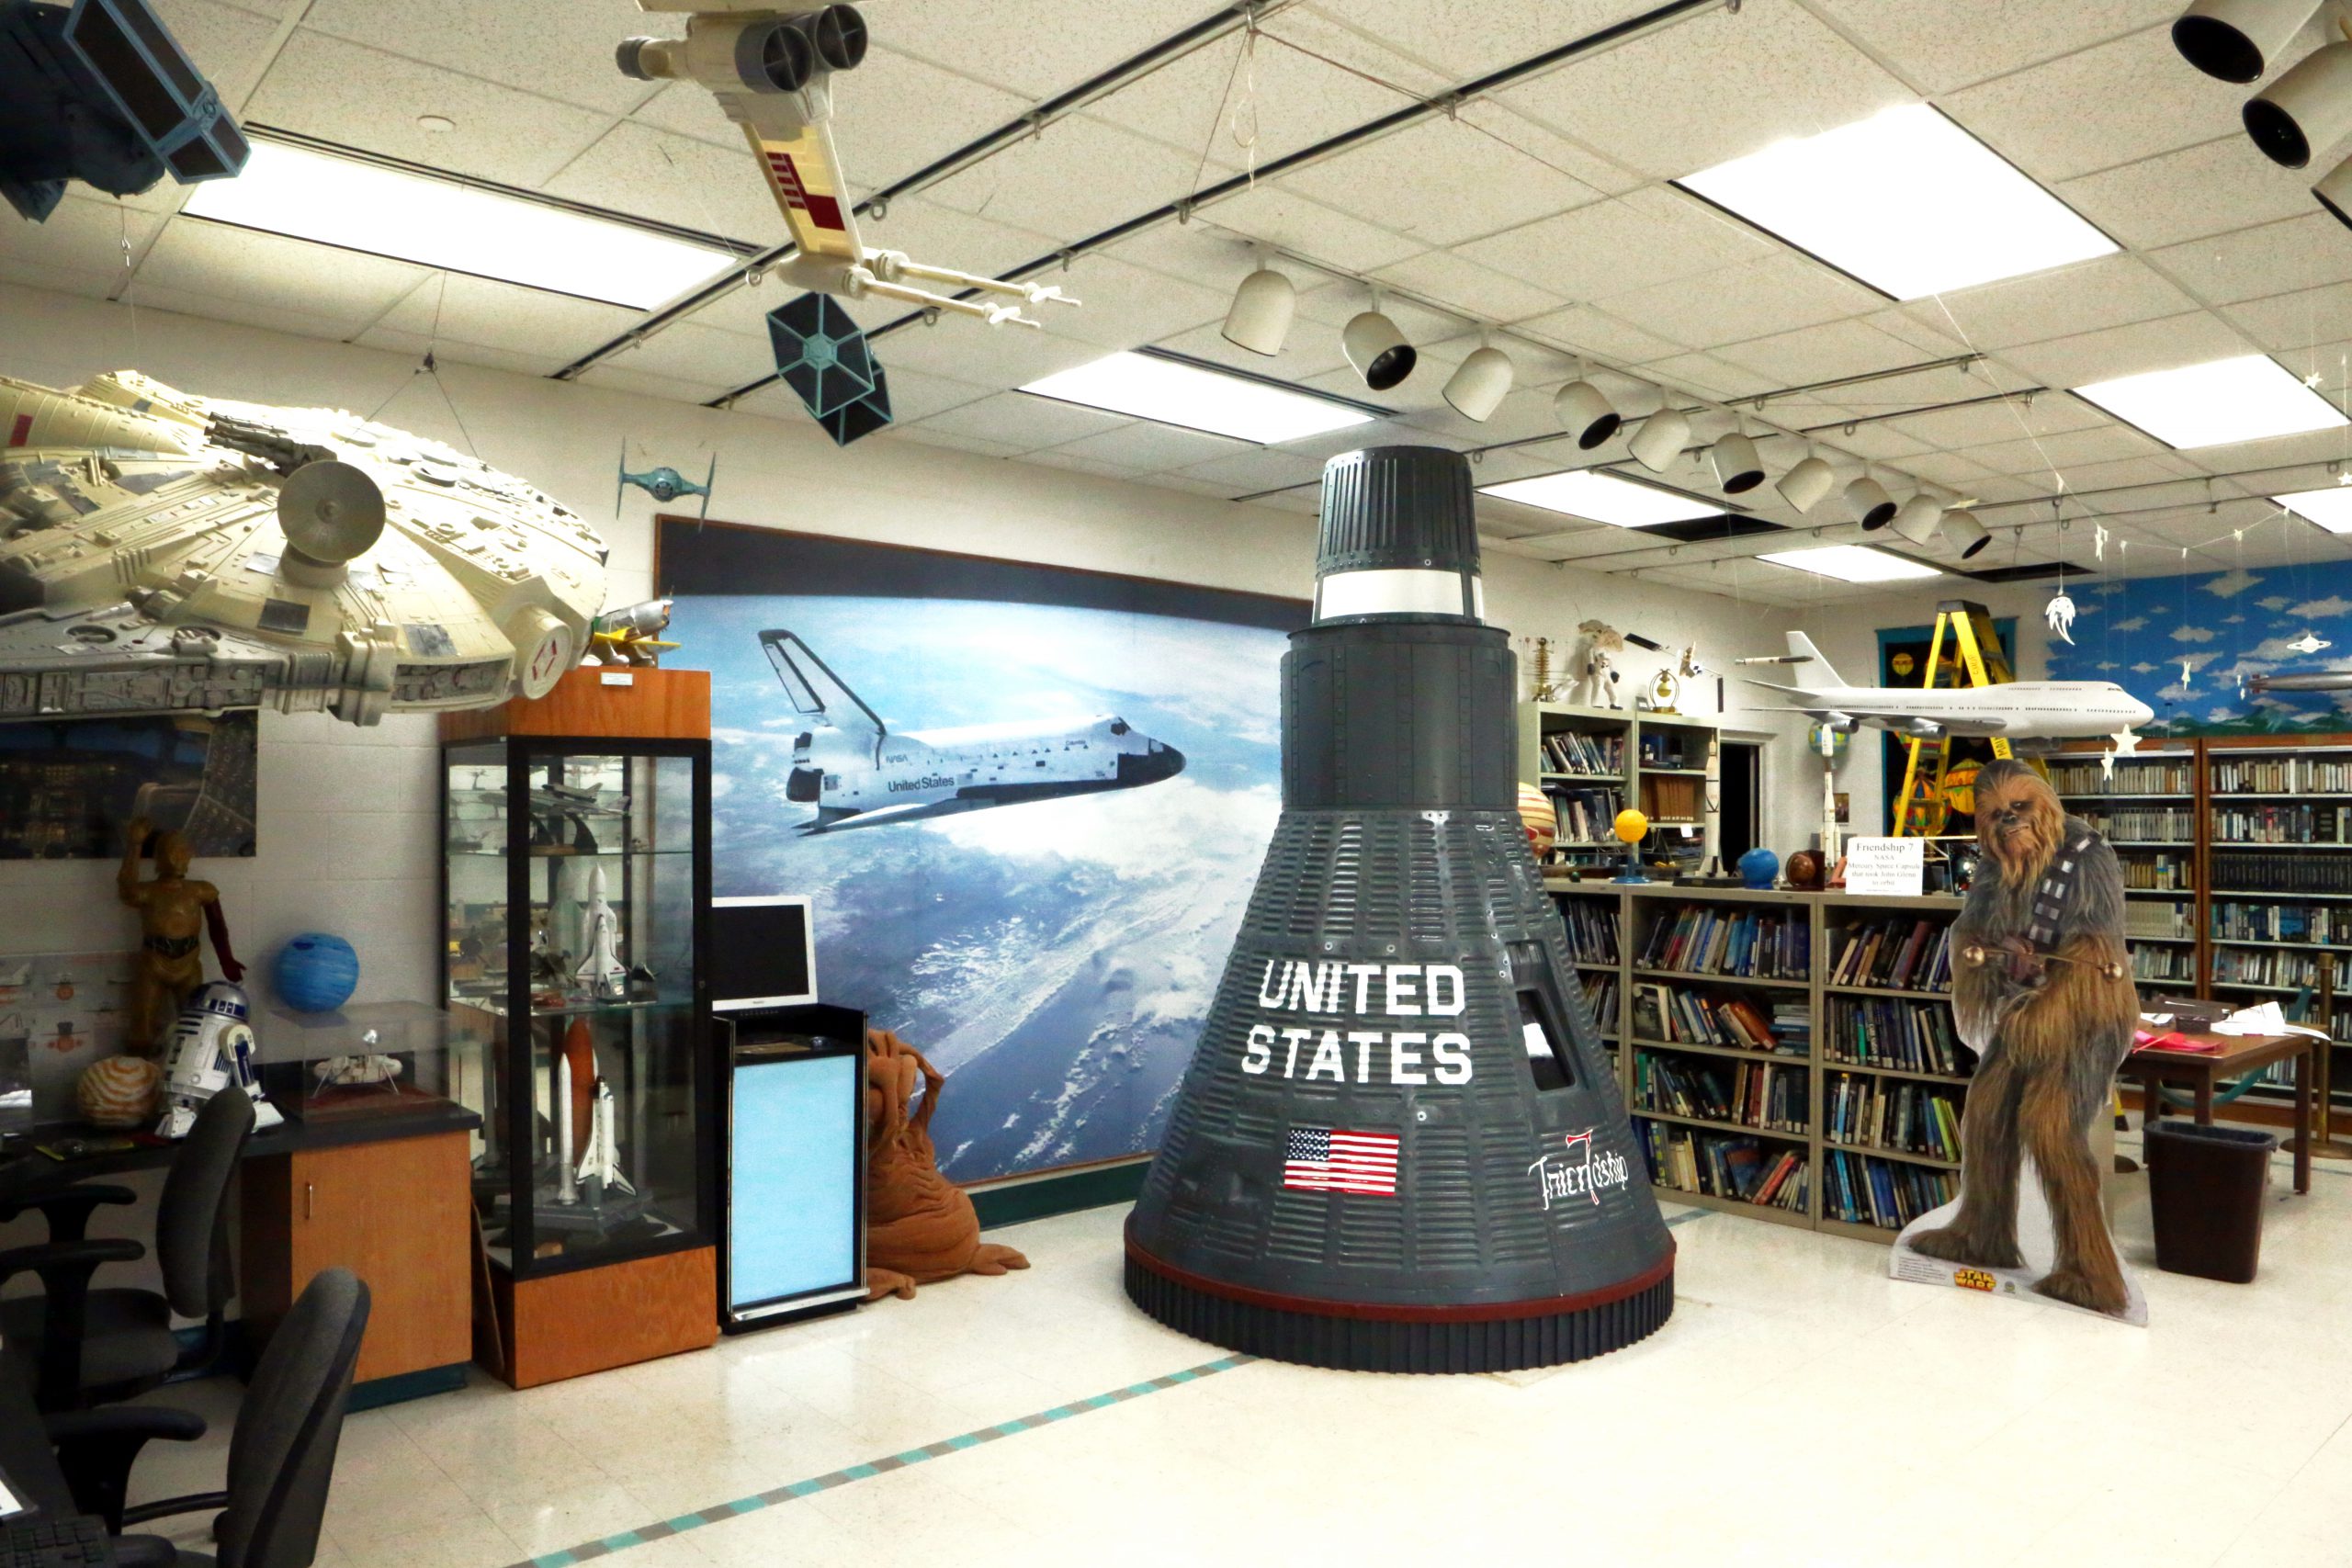 Exploration lab with large model of Millennium Falcon, a space shuttle capsule, Chewbacca cardboard cutout, books, and other fun toys